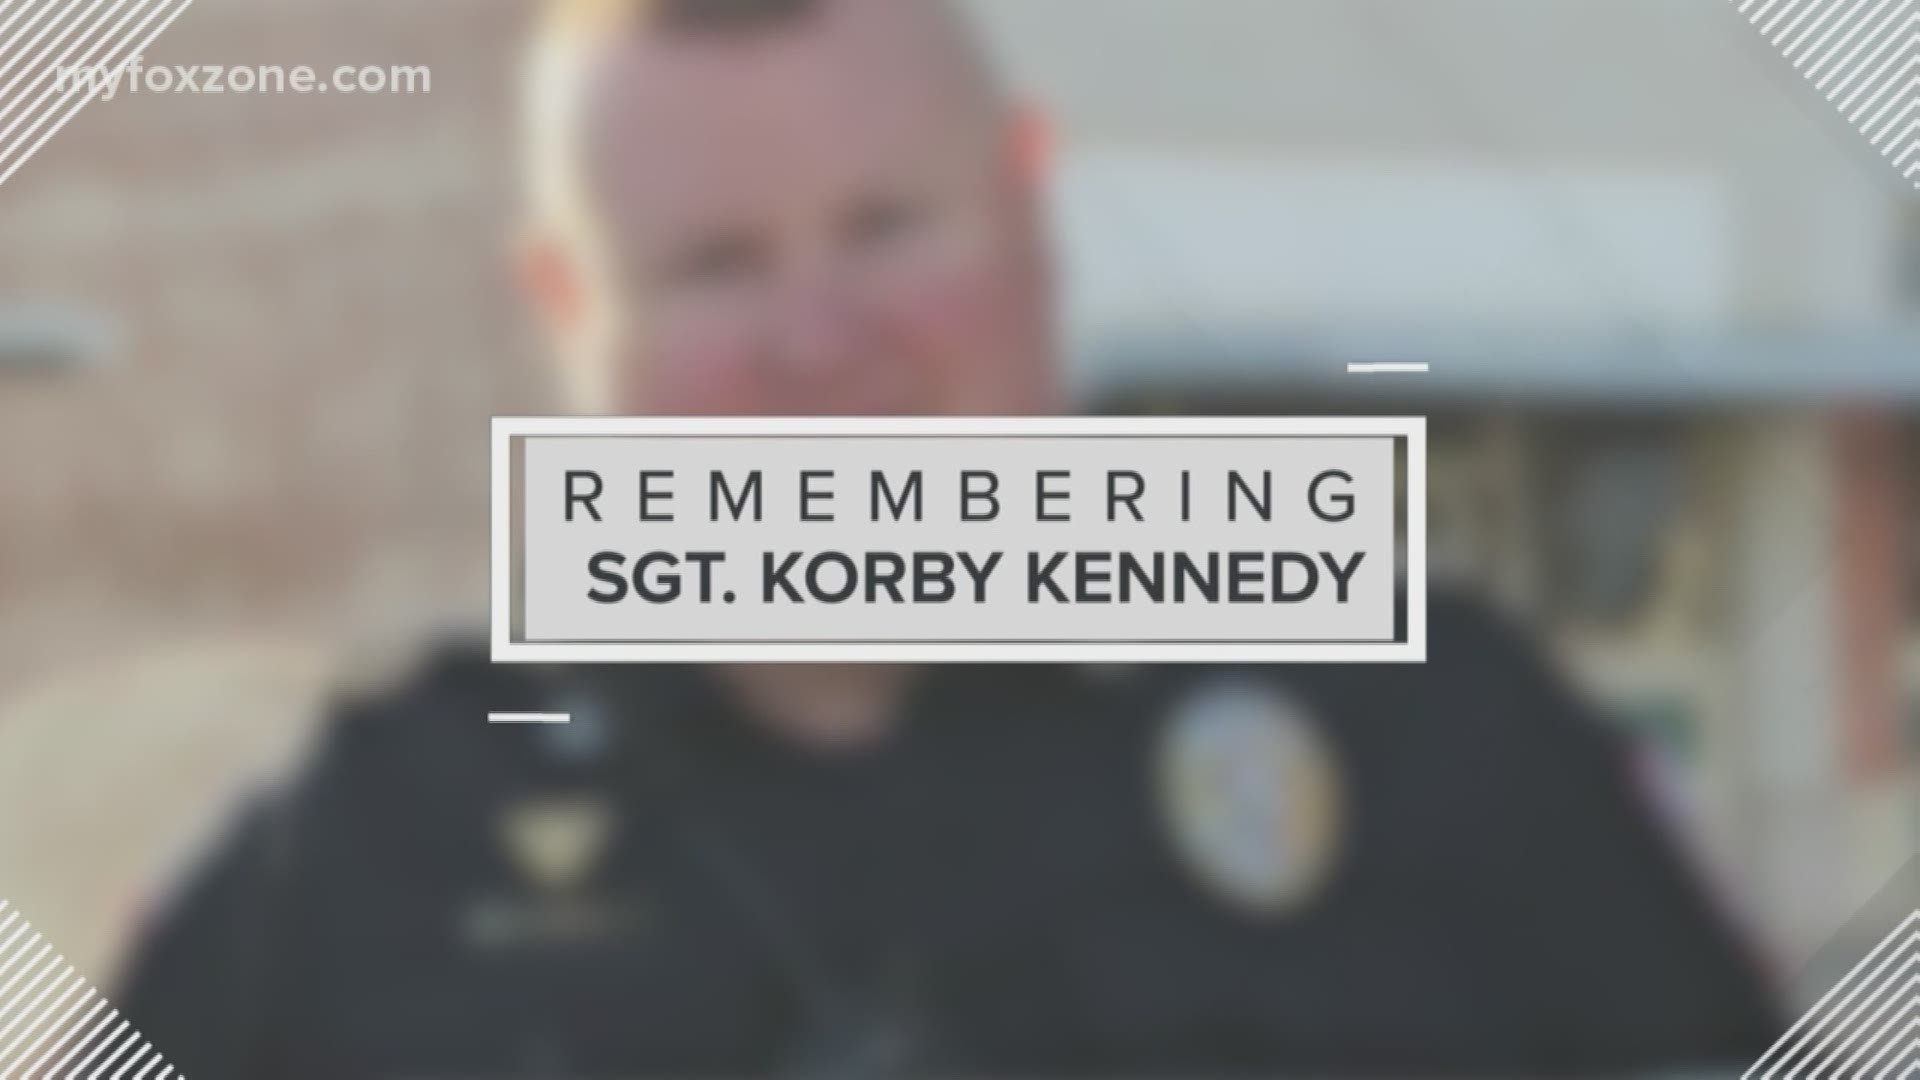 Sergeant Korby Kennedy was killed in a motorcycle crash on Knickerbocker Road in 2015. FOX West Texas, with the music of Zak Webb, paid tribute to the fallen sergeant.